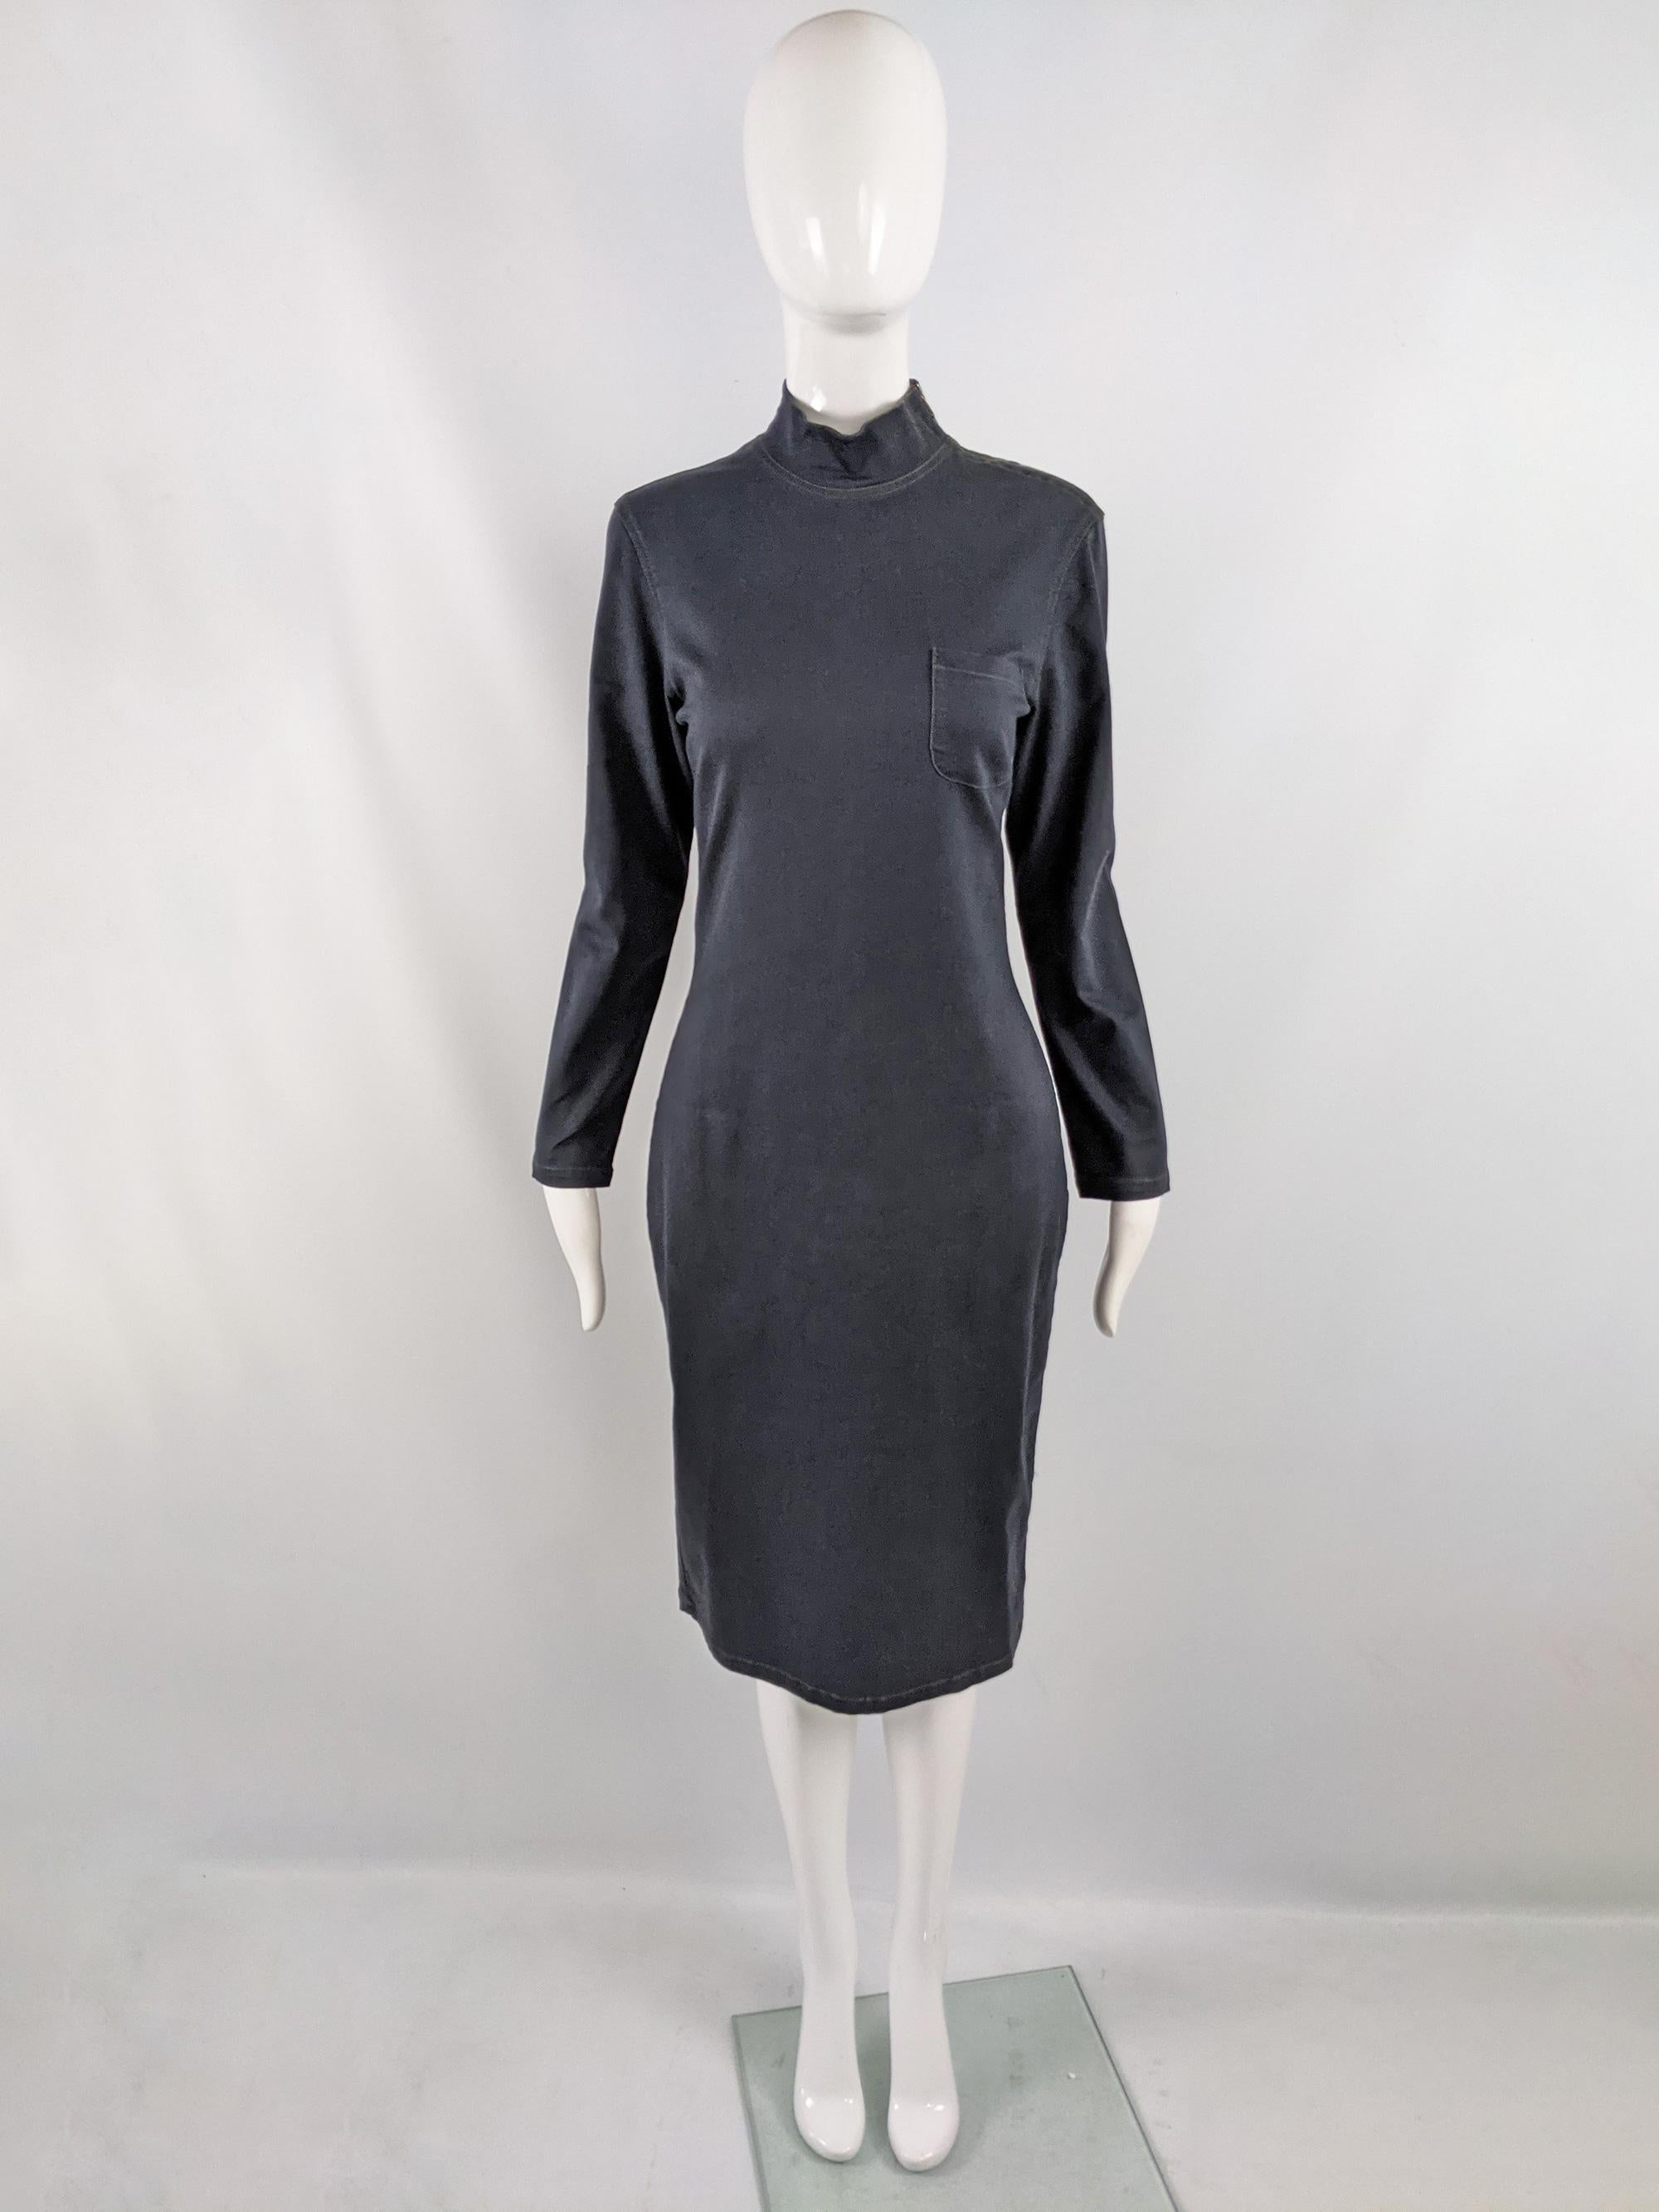 An excellent vintage Jean Paul Gaultier shift dress from the 90s. In a darkest blue, almost black stretch denim fabric with a mock neck, long sleeves and a zip opening at the side of the neck. 

Size: Unlabelled; measures roughly like a modern